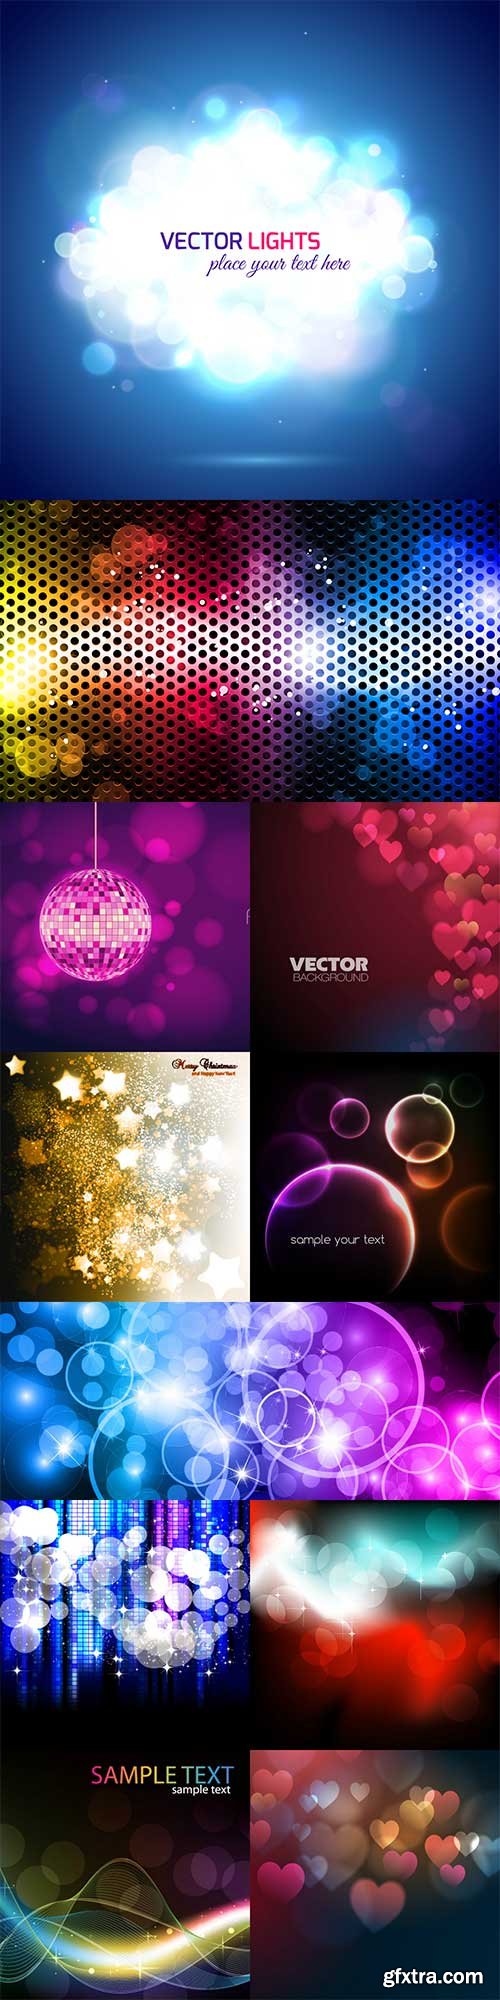 Vector bokeh colorful backgrounds - 7